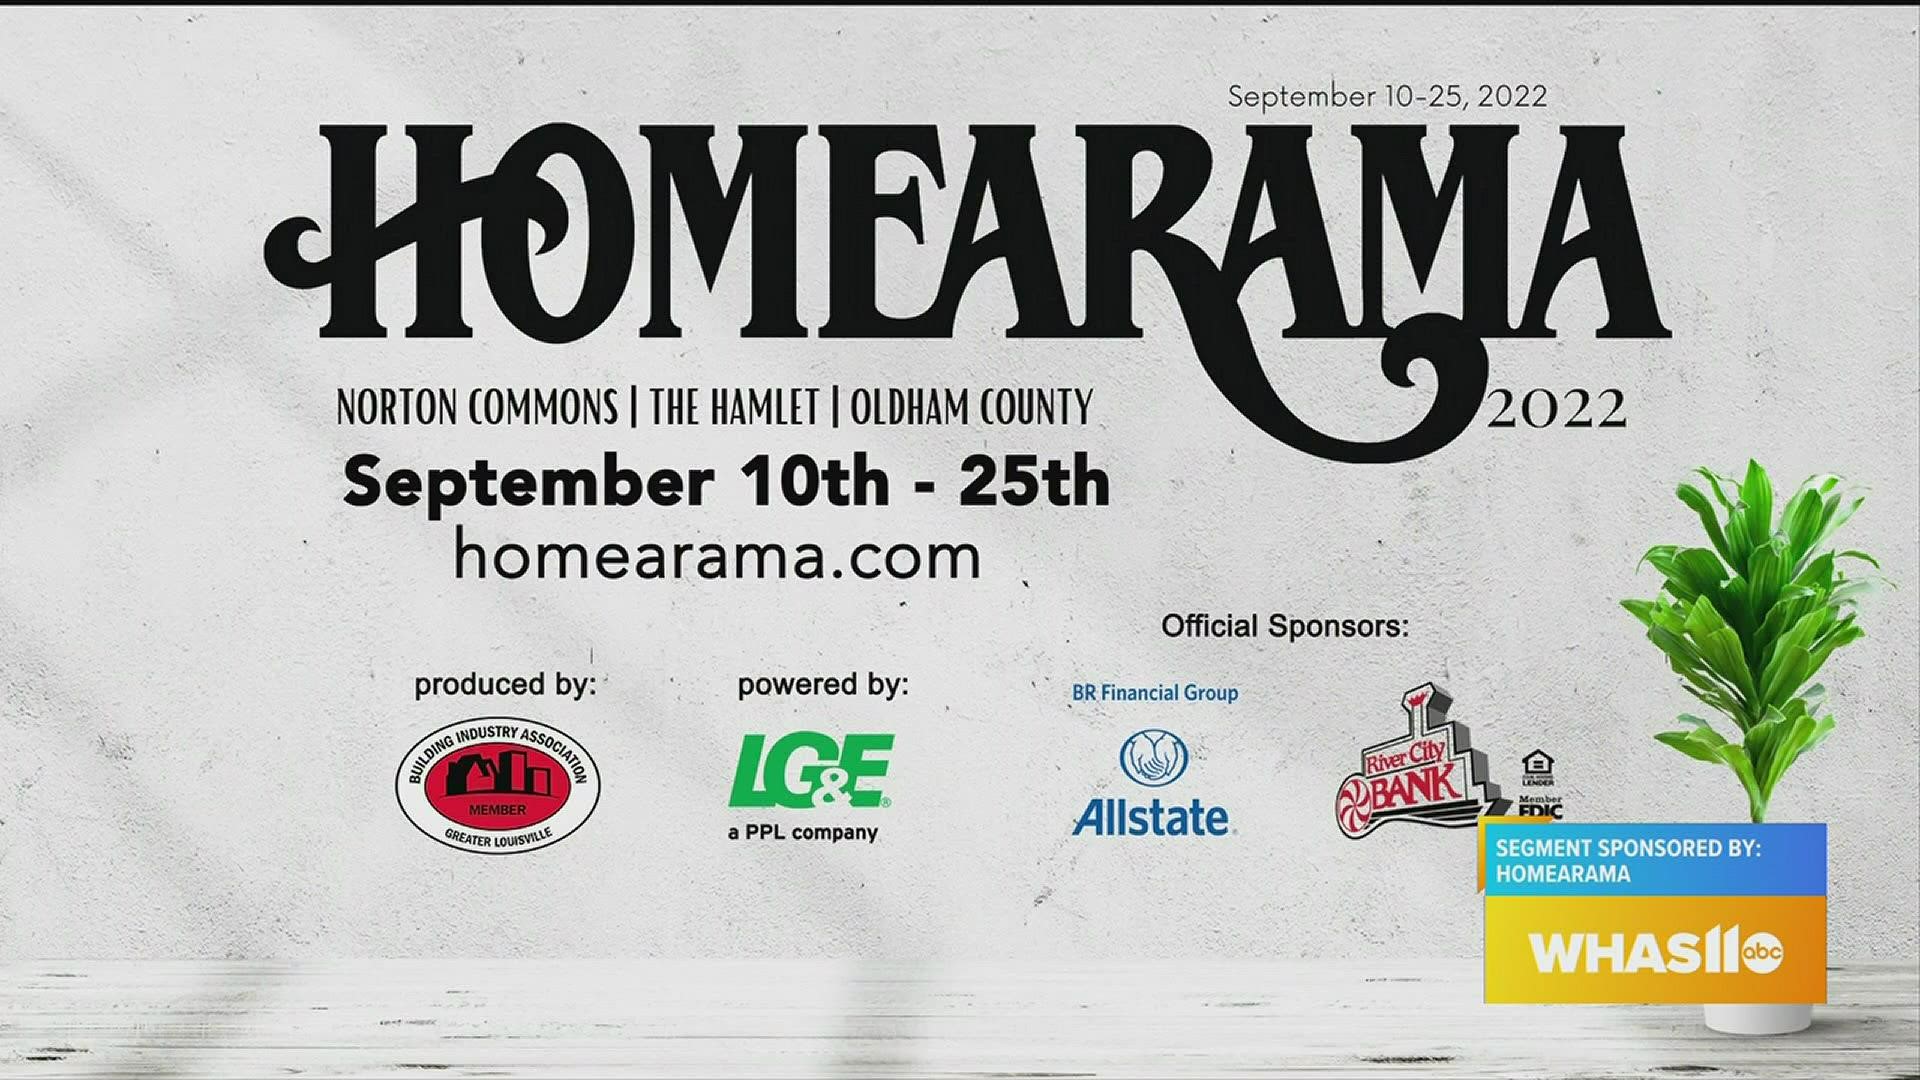 For tickets, information, or to take a virtual tour, visit homearama.com.